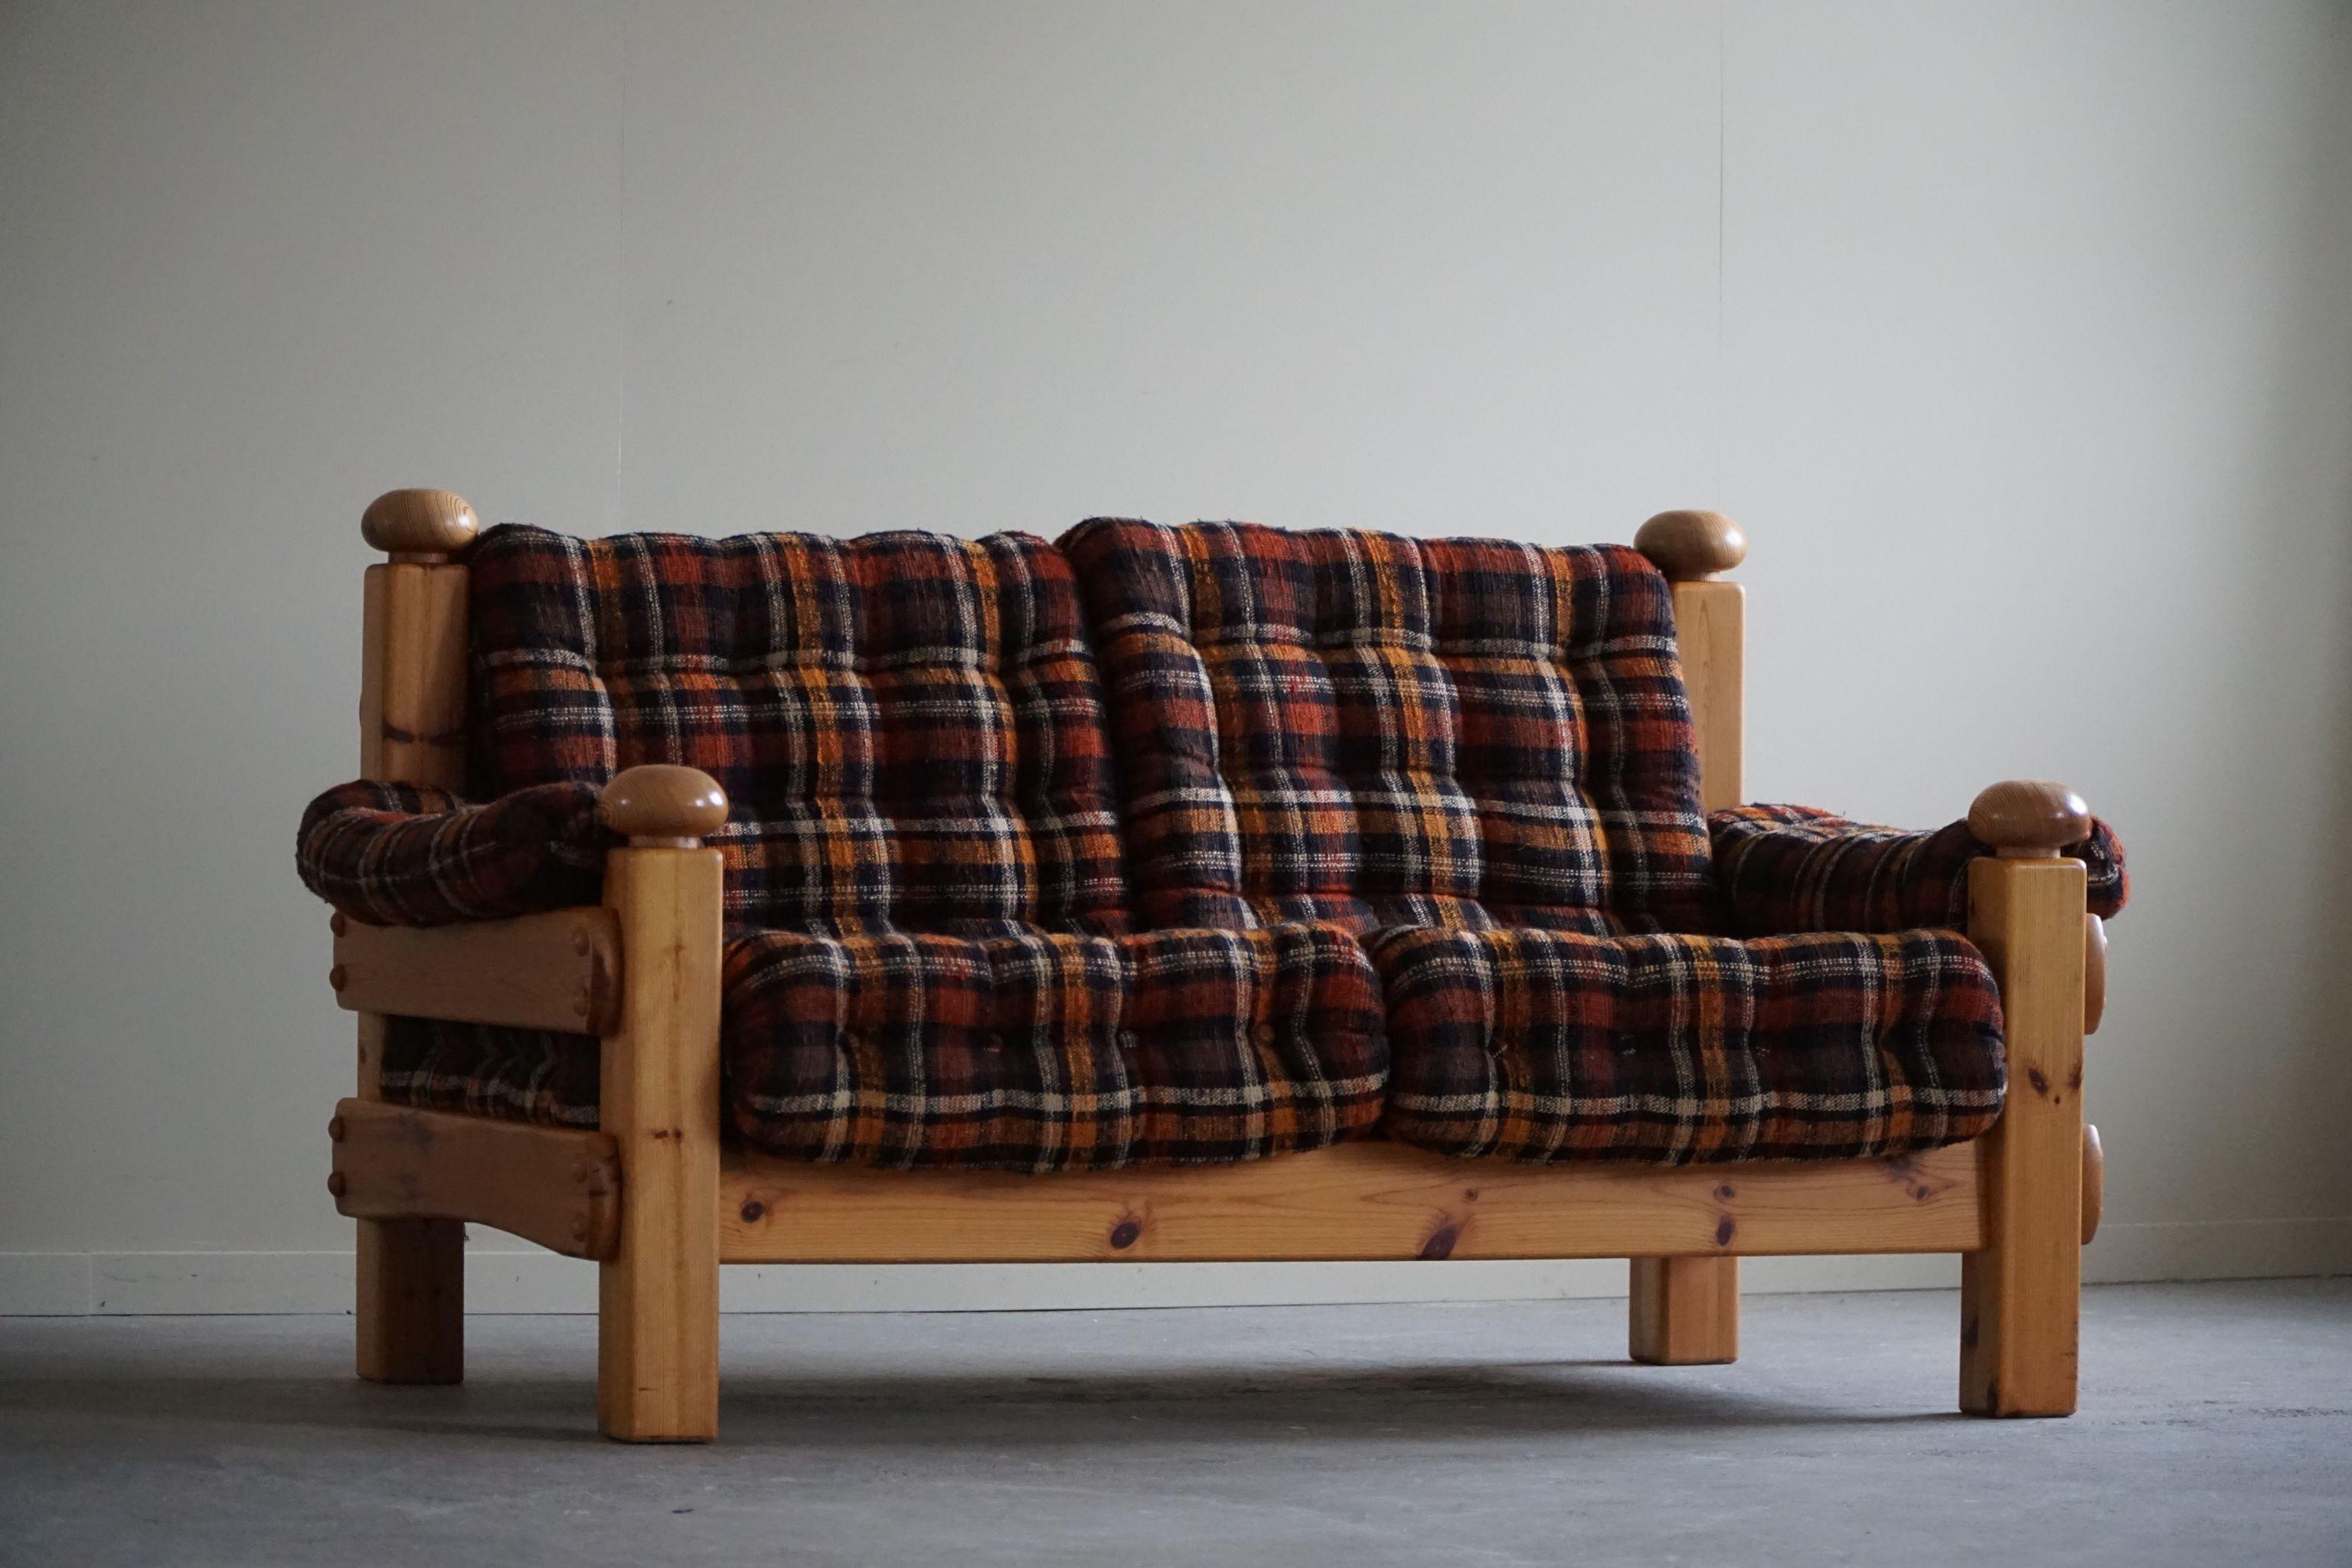 Two Seater Brutalist Sofa in Solid Pine, Swedish Modern, Made in the 1970s For Sale 5